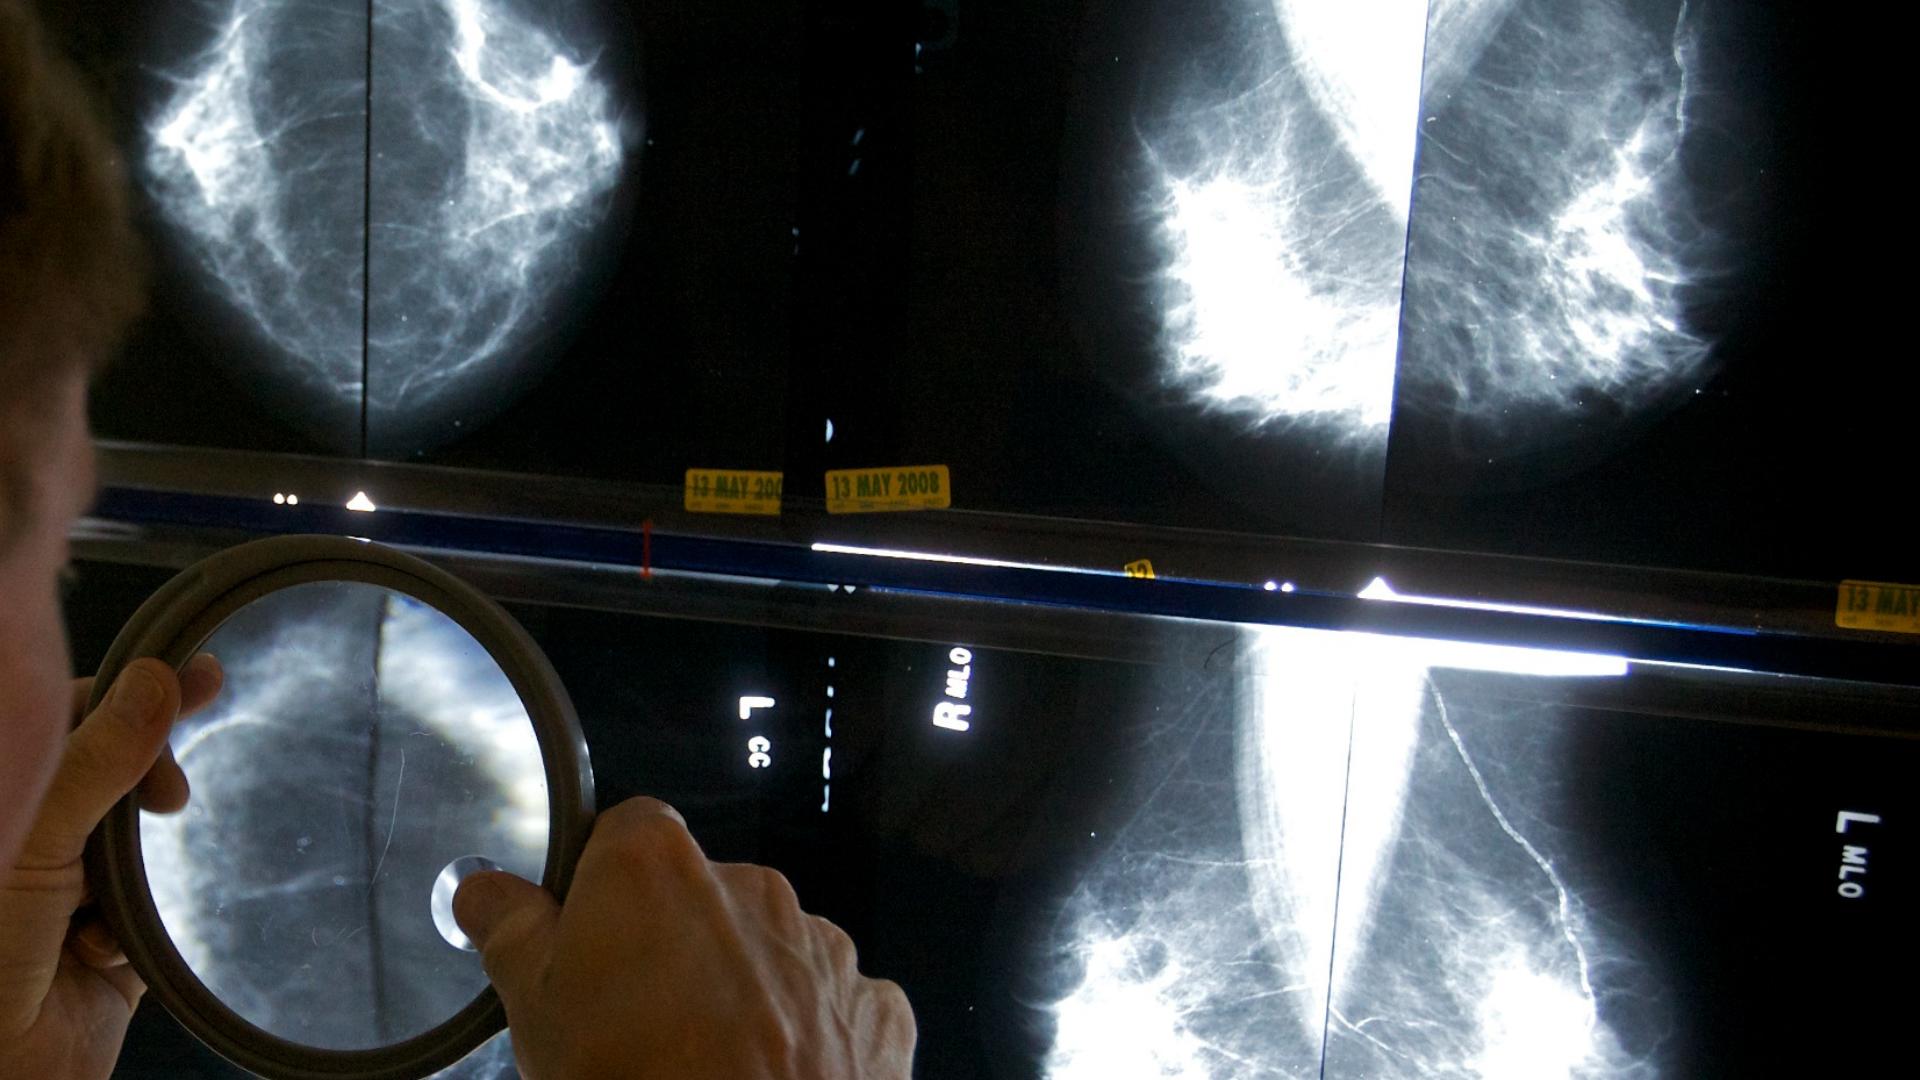 A panel of experts said women with an average risk of developing breast cancer should start getting mammograms every other year, starting at age 40.